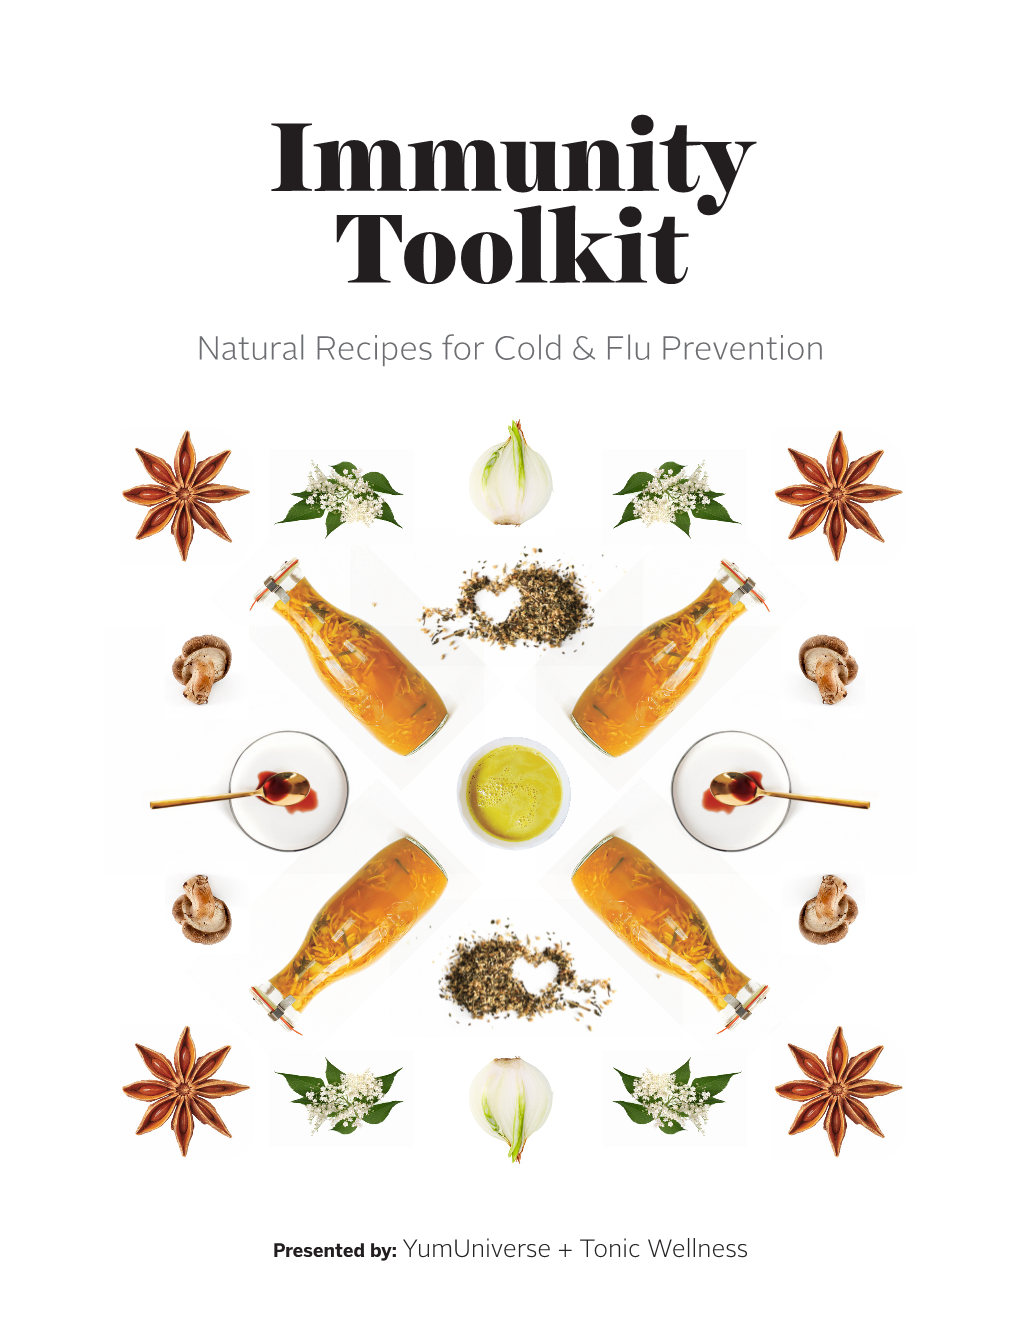 Immunity Toolkit Natural Recipes for Cold & Flu Prevention